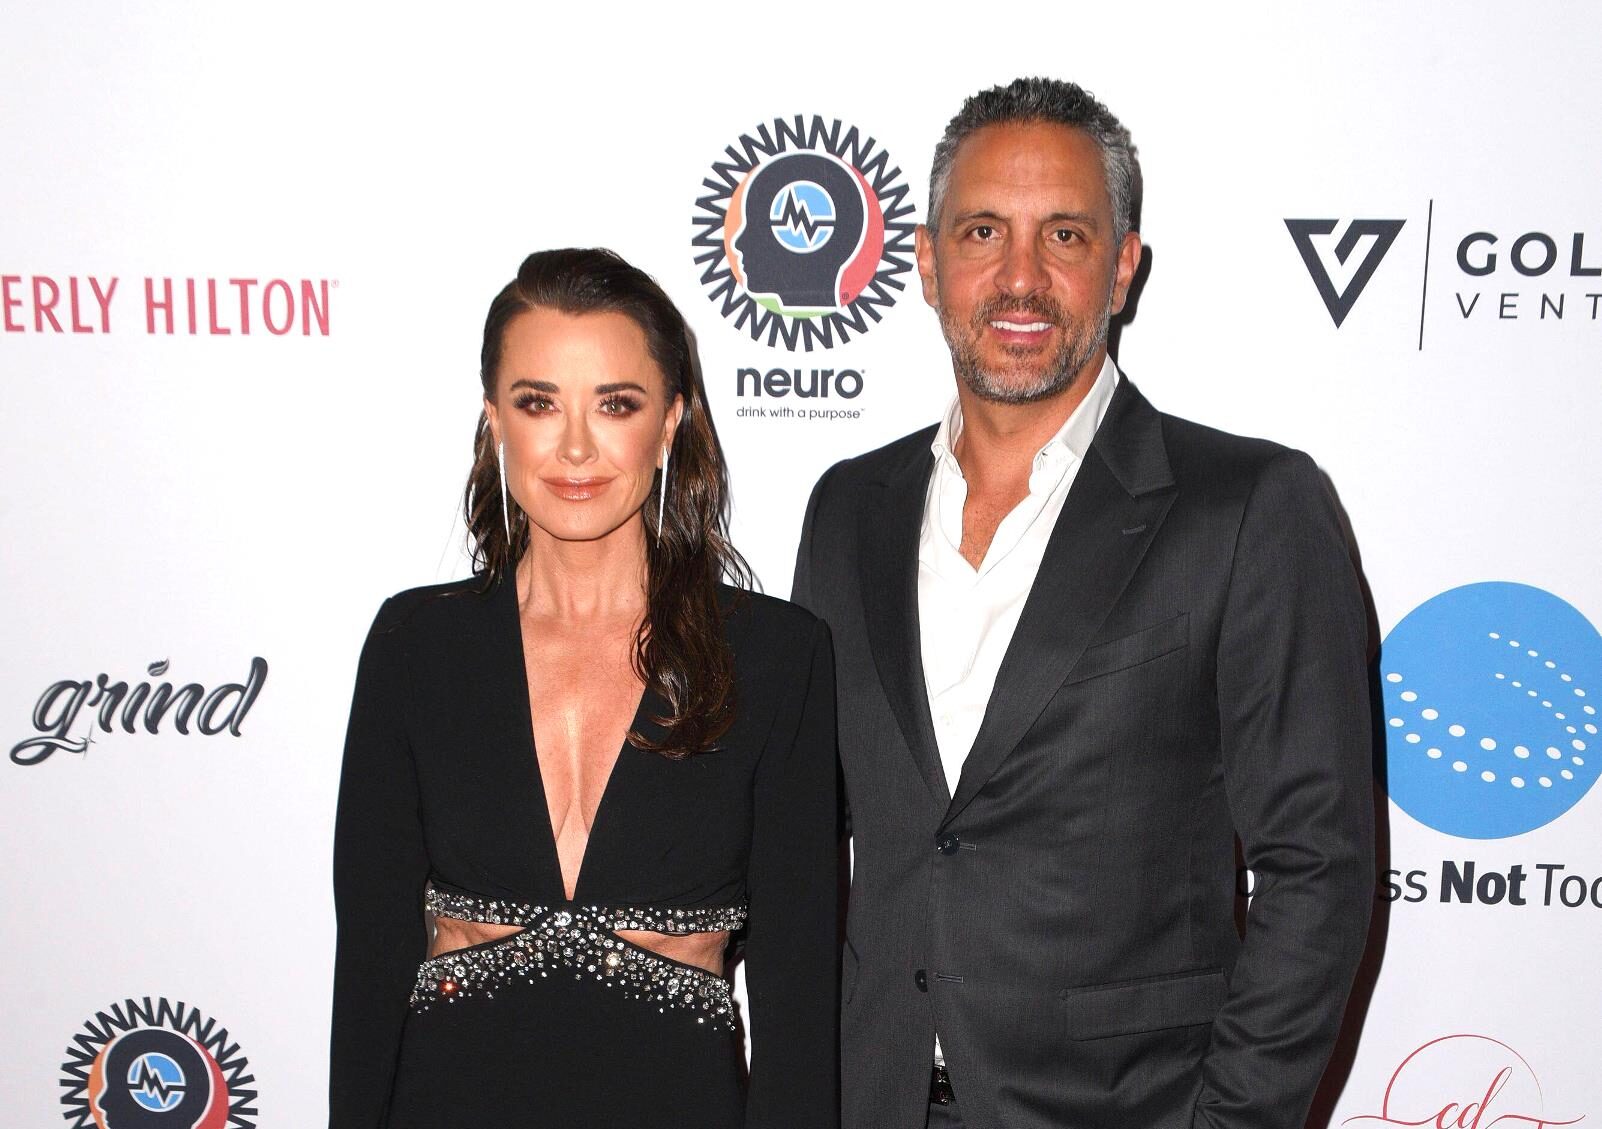 PHOTOS: RHOBH Star Kyle Richards Slams Claim of Mauricio Being Photoshopped Into Family Vacation Pics and Criticism About How 15-Yr-Old Portia Dresses, Plus Shows Weight Loss in Cut-Out Swimsuit